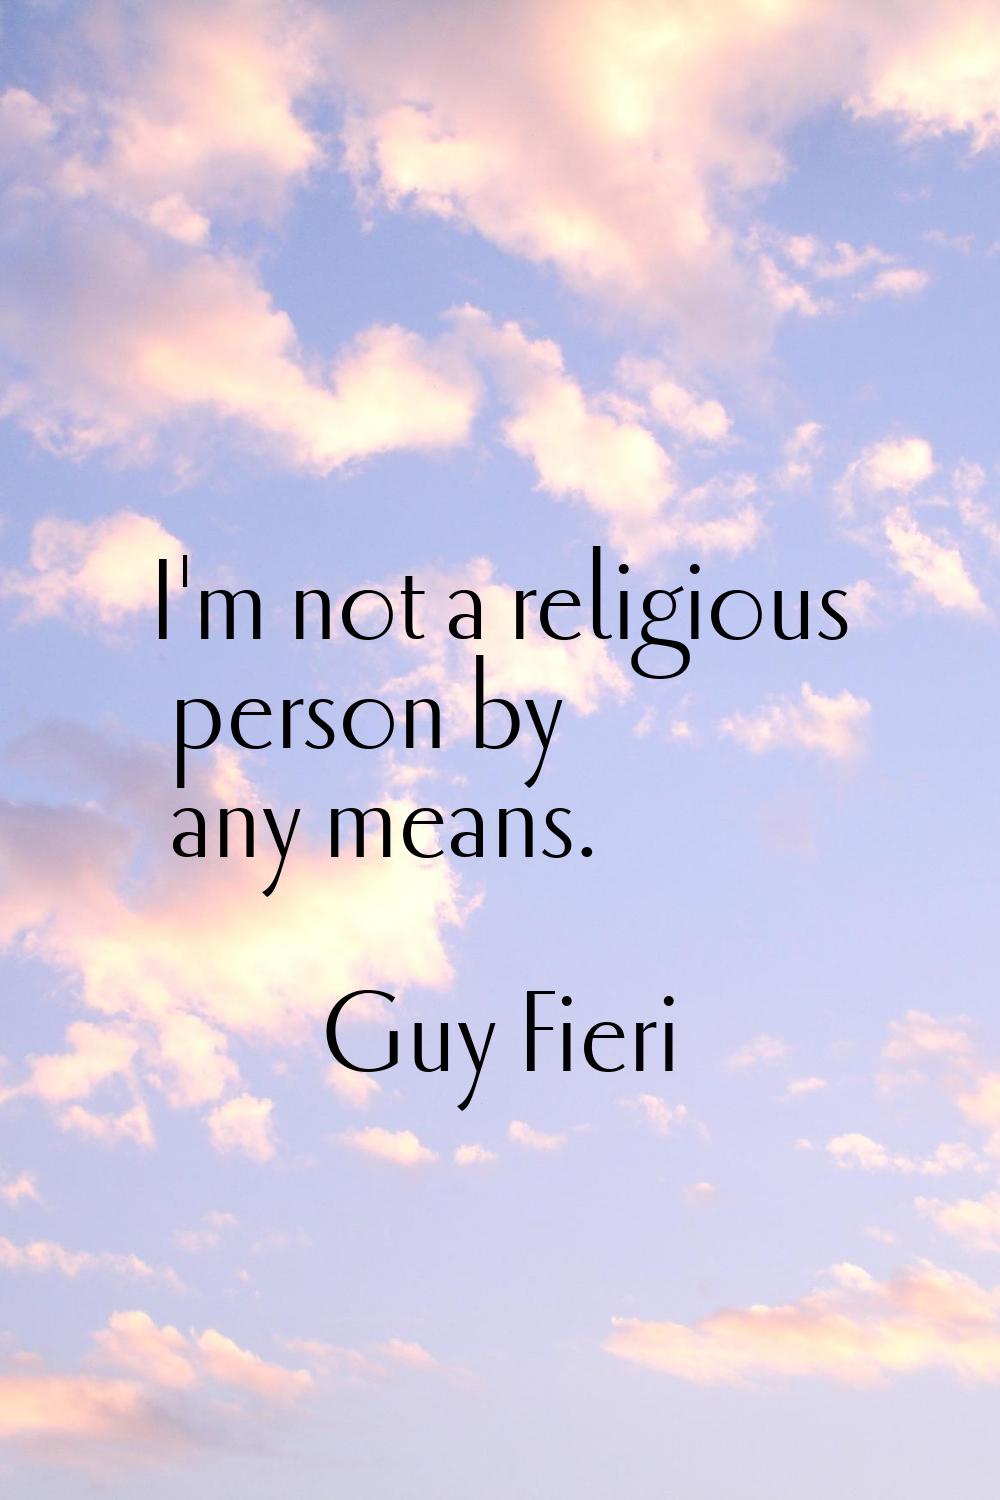 I'm not a religious person by any means.